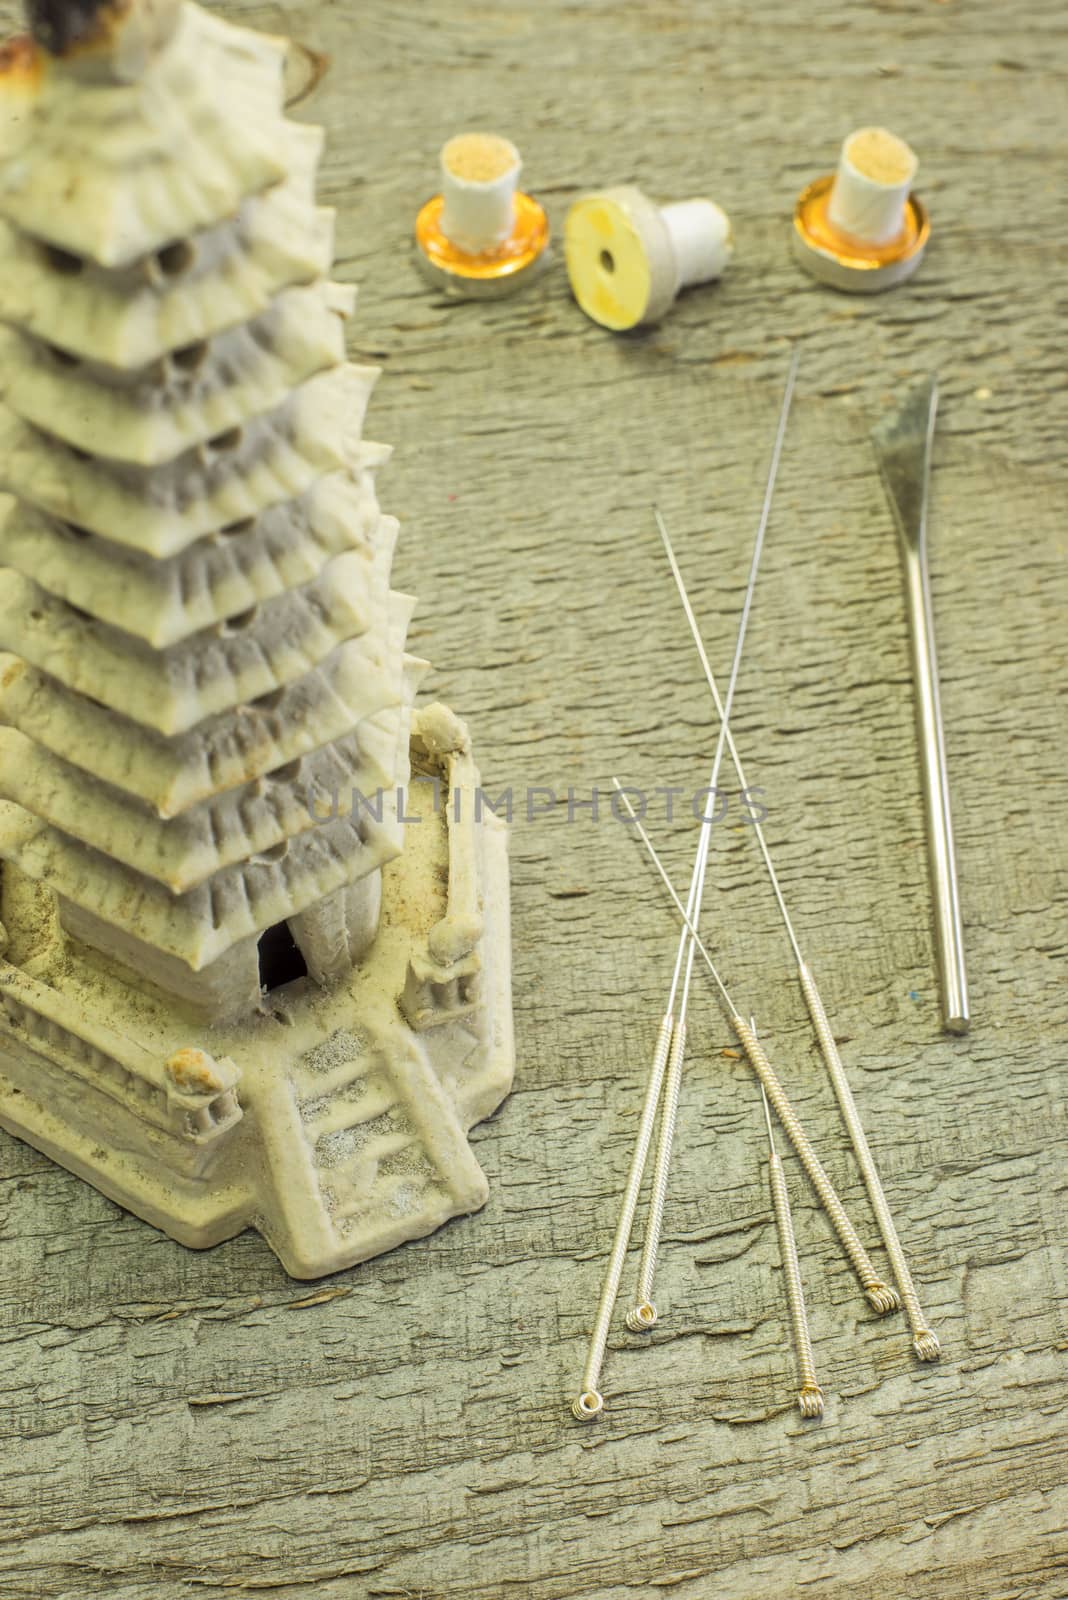 acupuncture needles and moxibustion cones